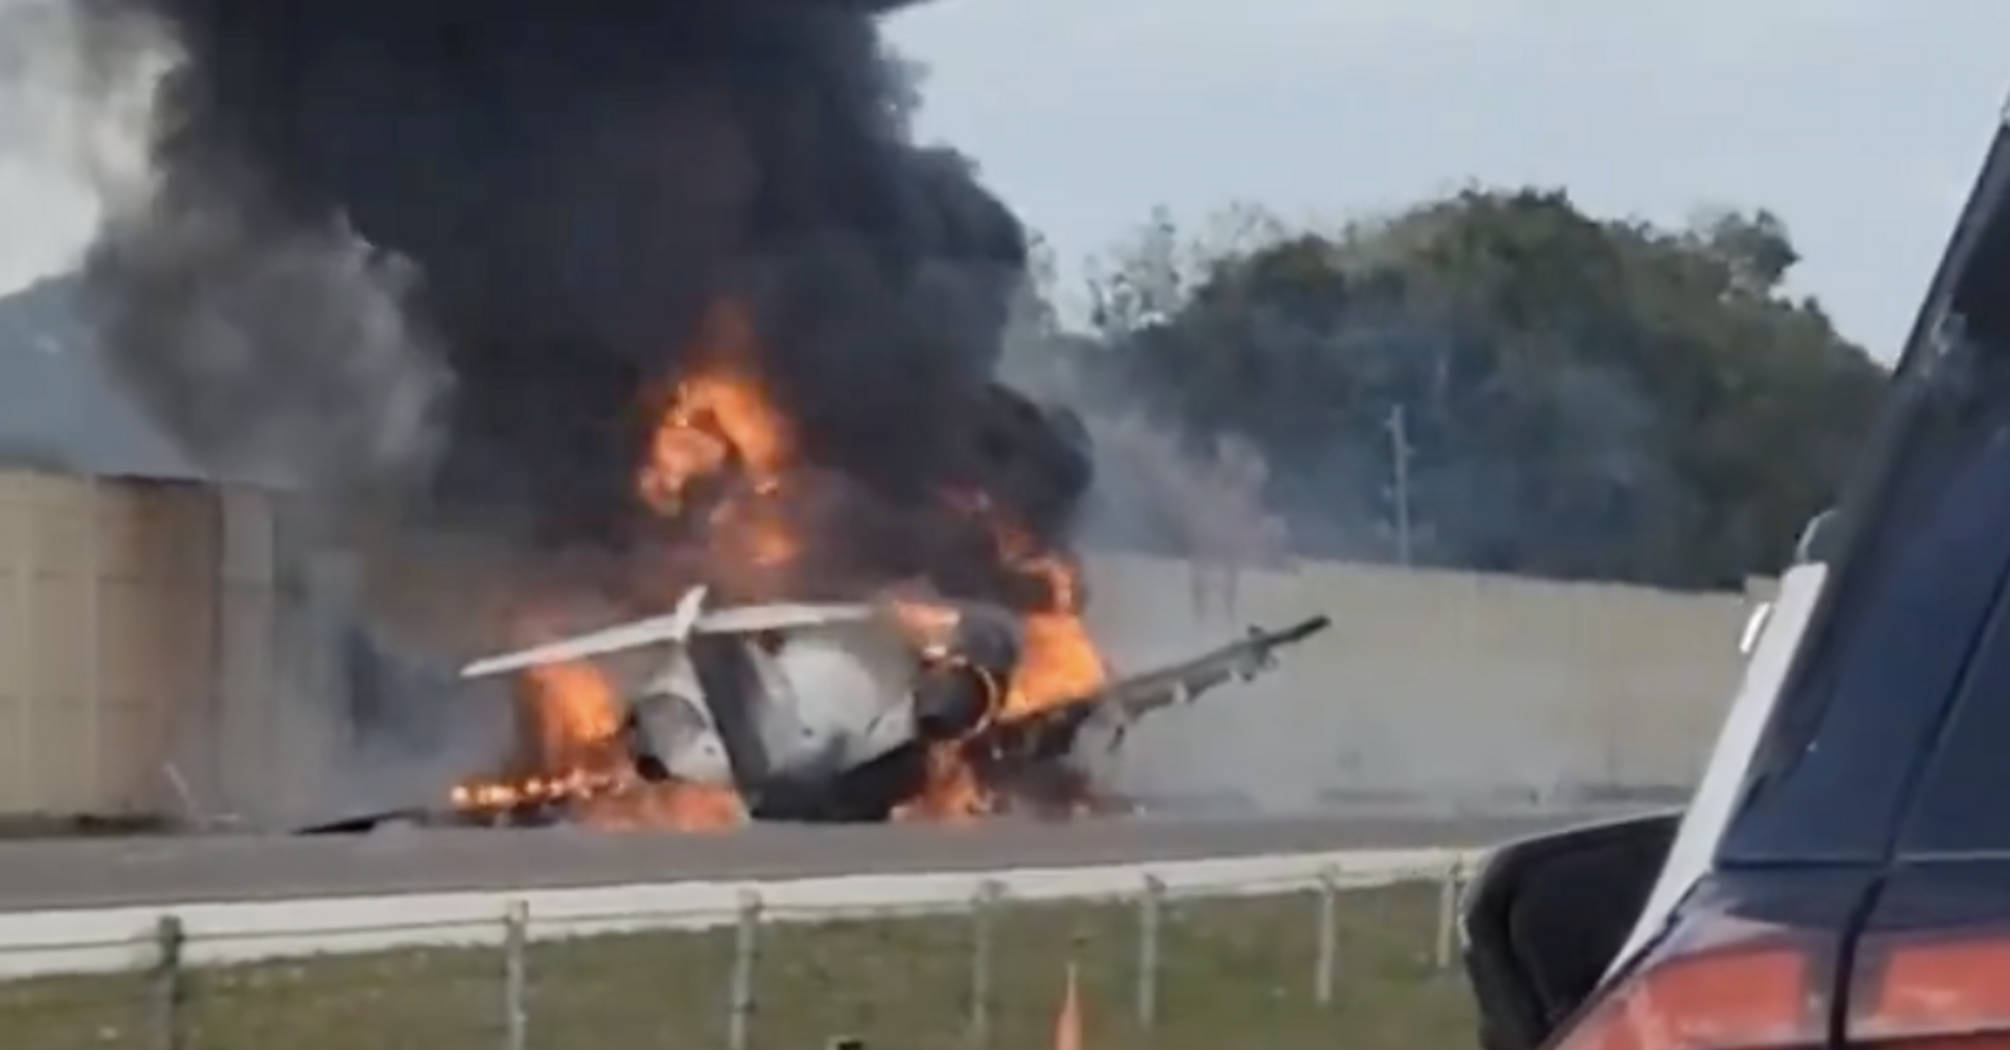 In the USA, a plane crashed onto a highway and caught fire: two people died